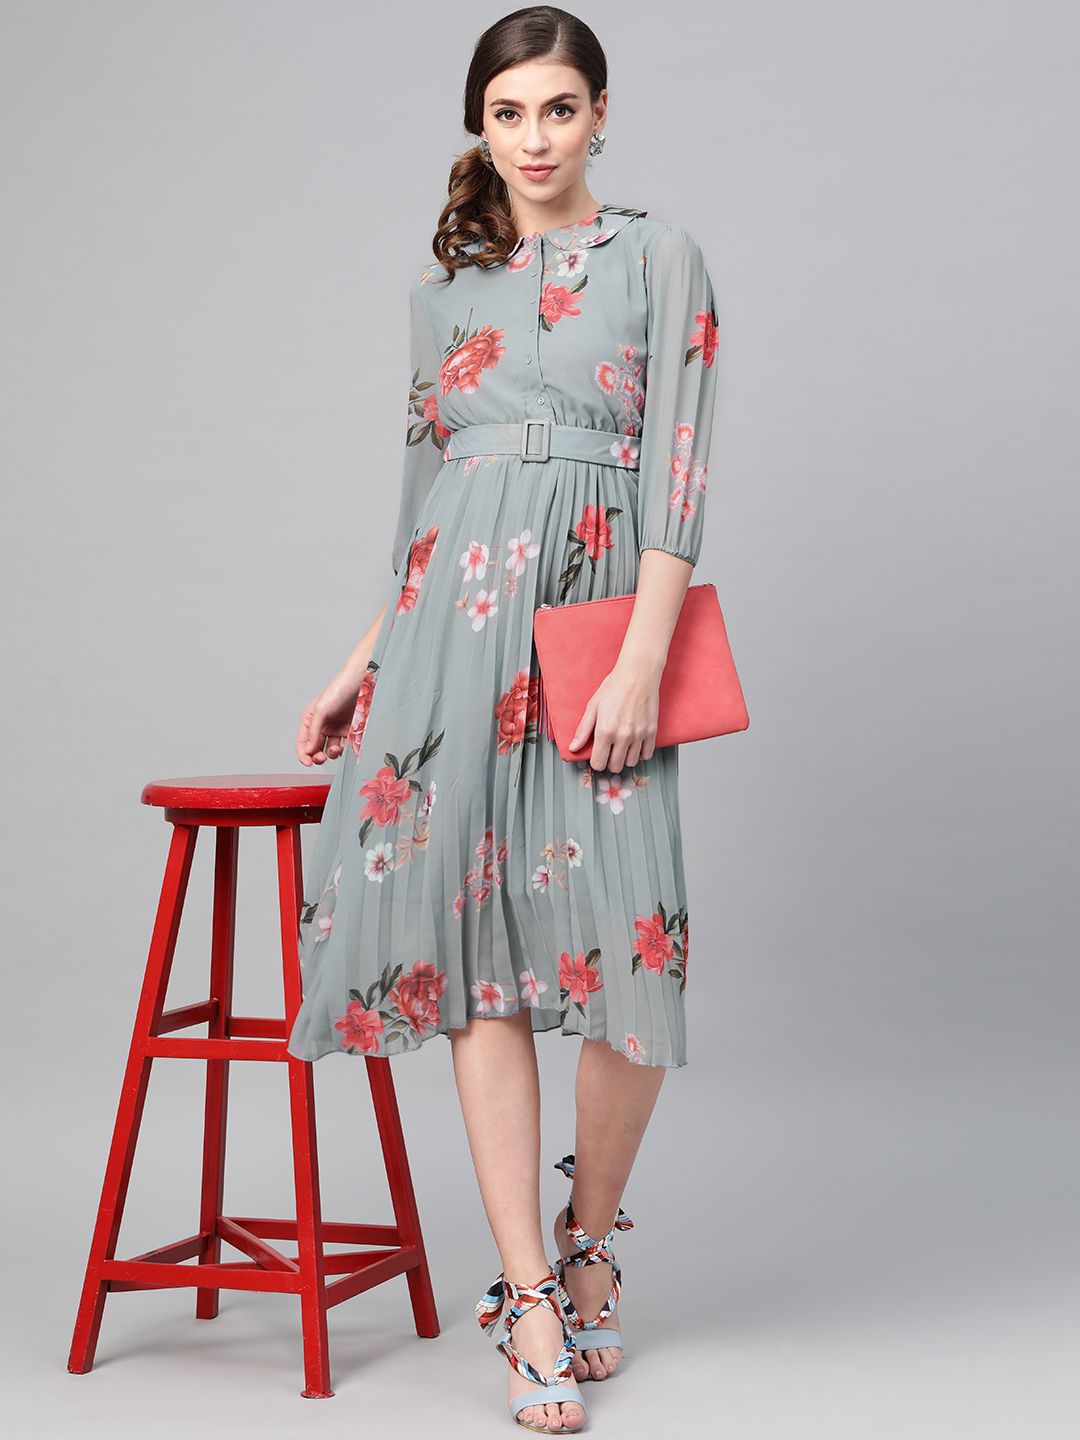 SASSAFRAS Grey & Peach-Coloured Floral Printed Accordian Pleat Fit & Flare Dress Price in India